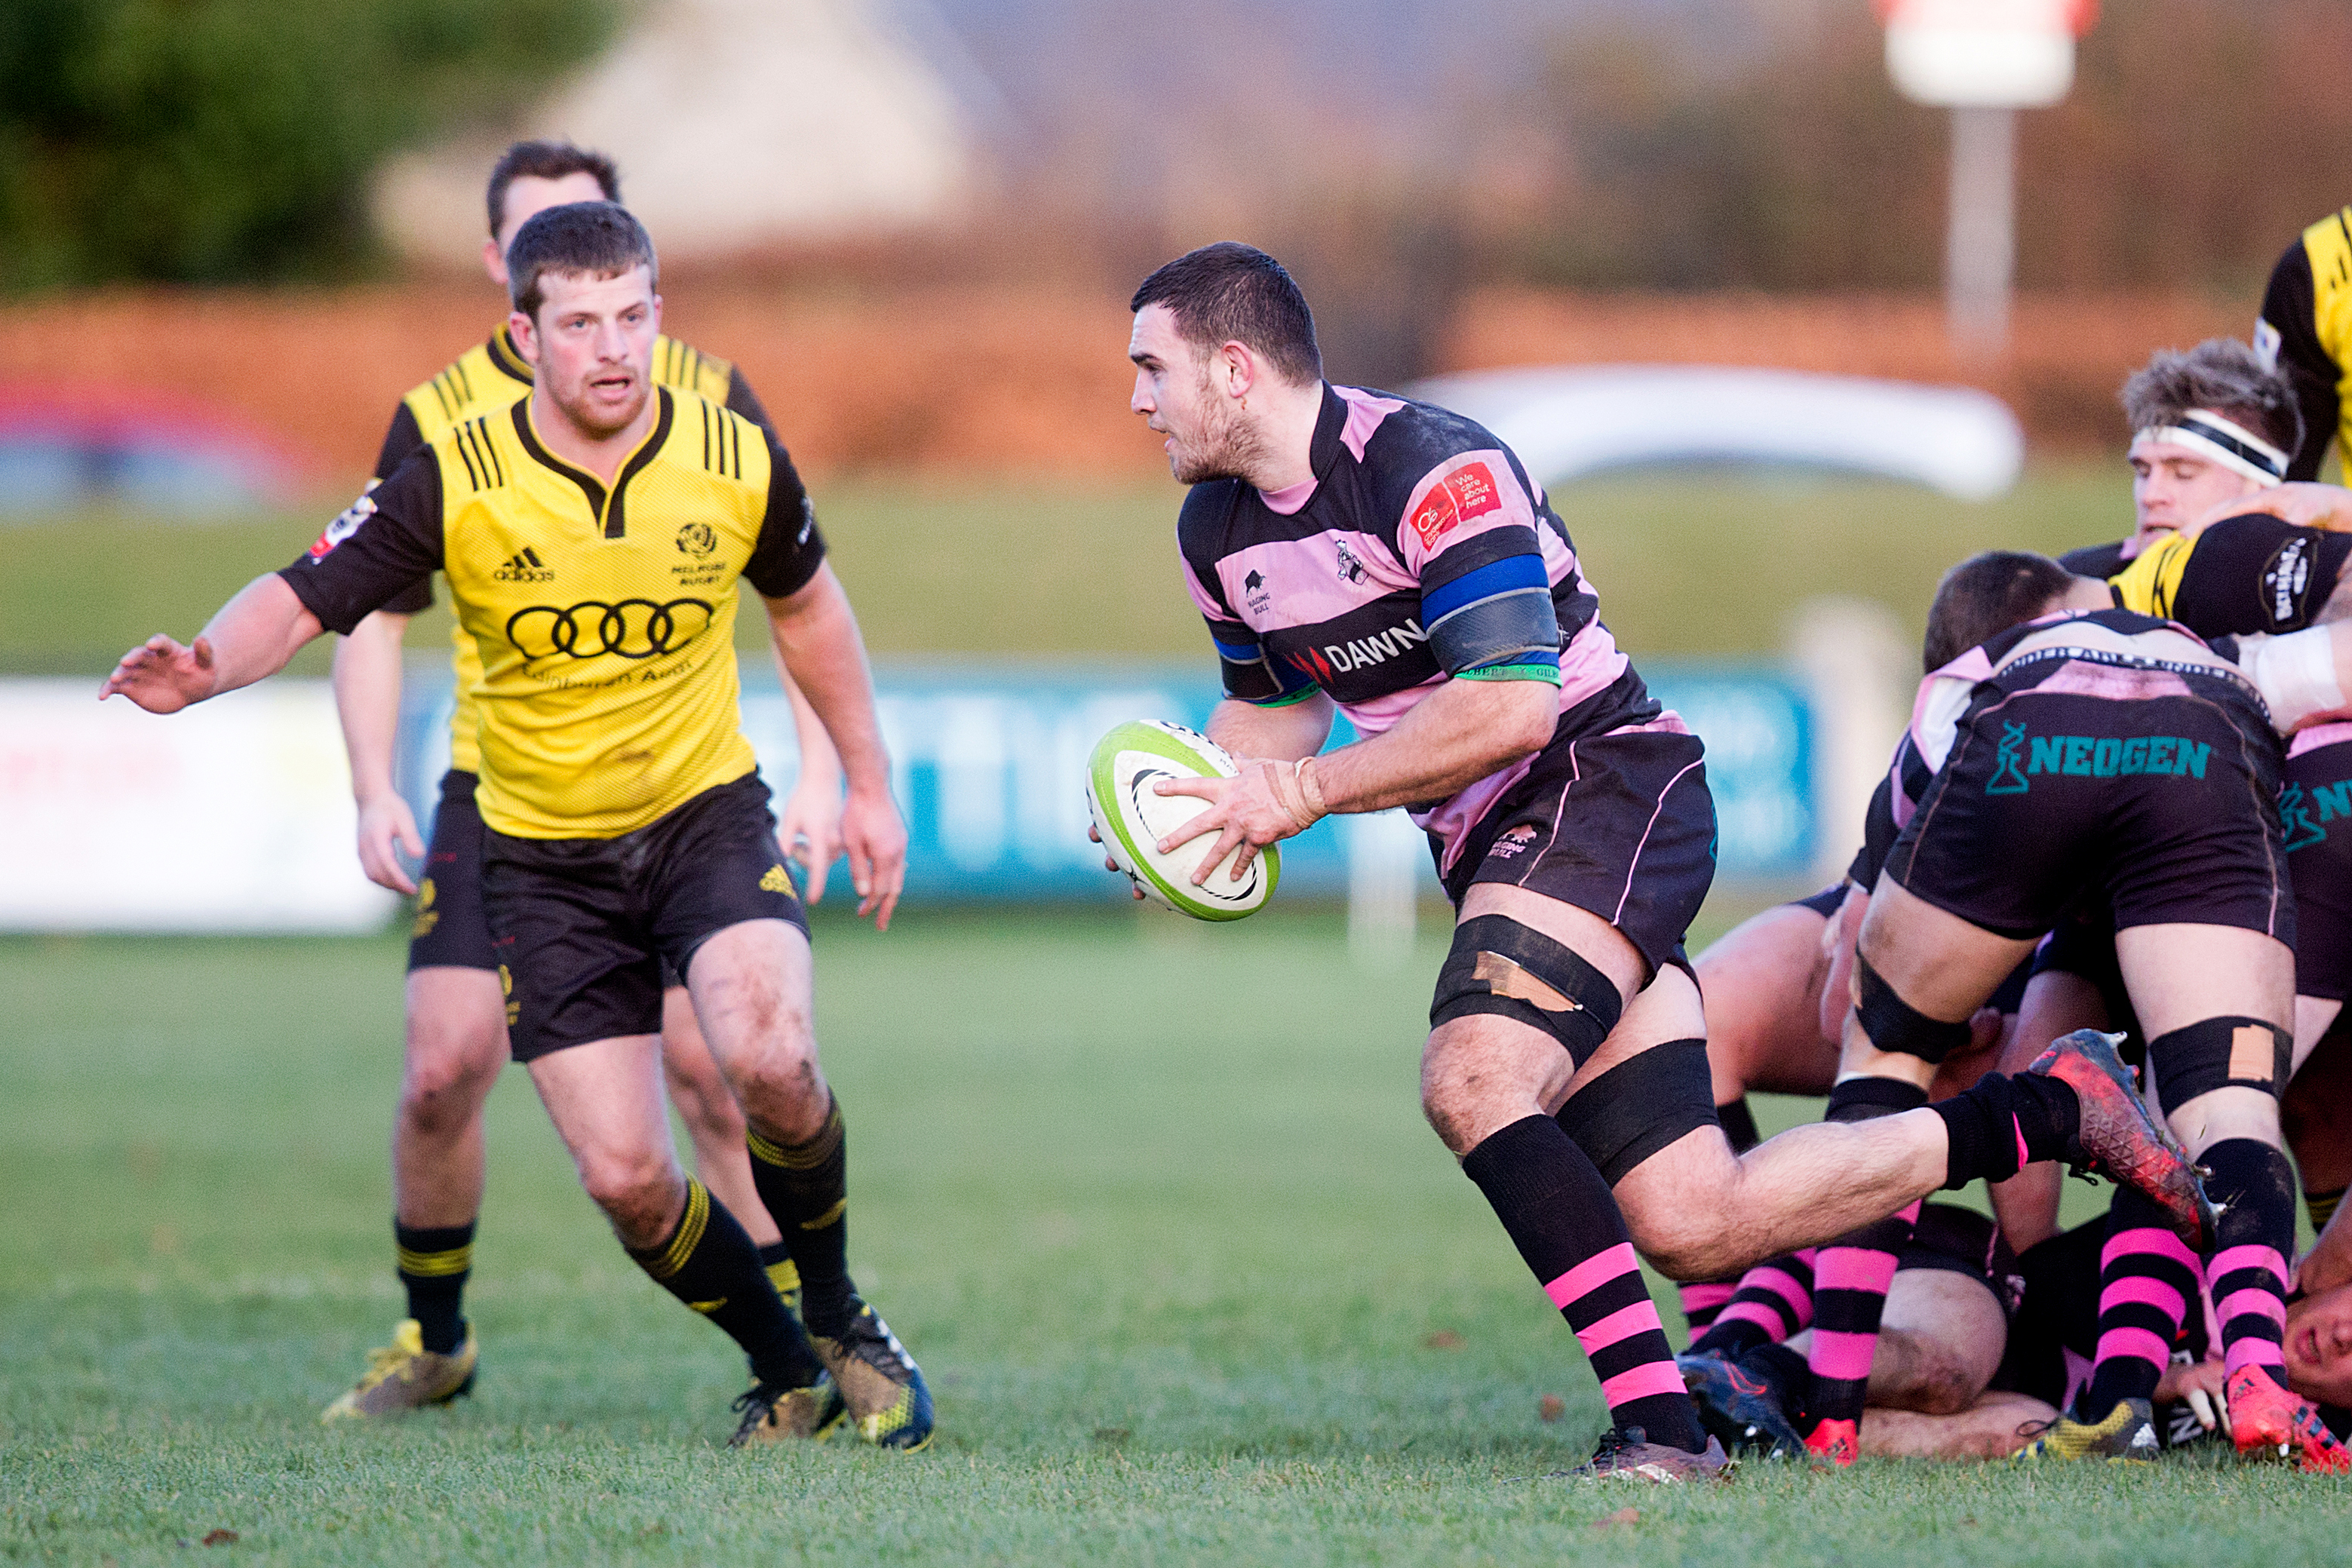 Adam Ashe made his comeback game after hip surgery for Ayr on Saturday.